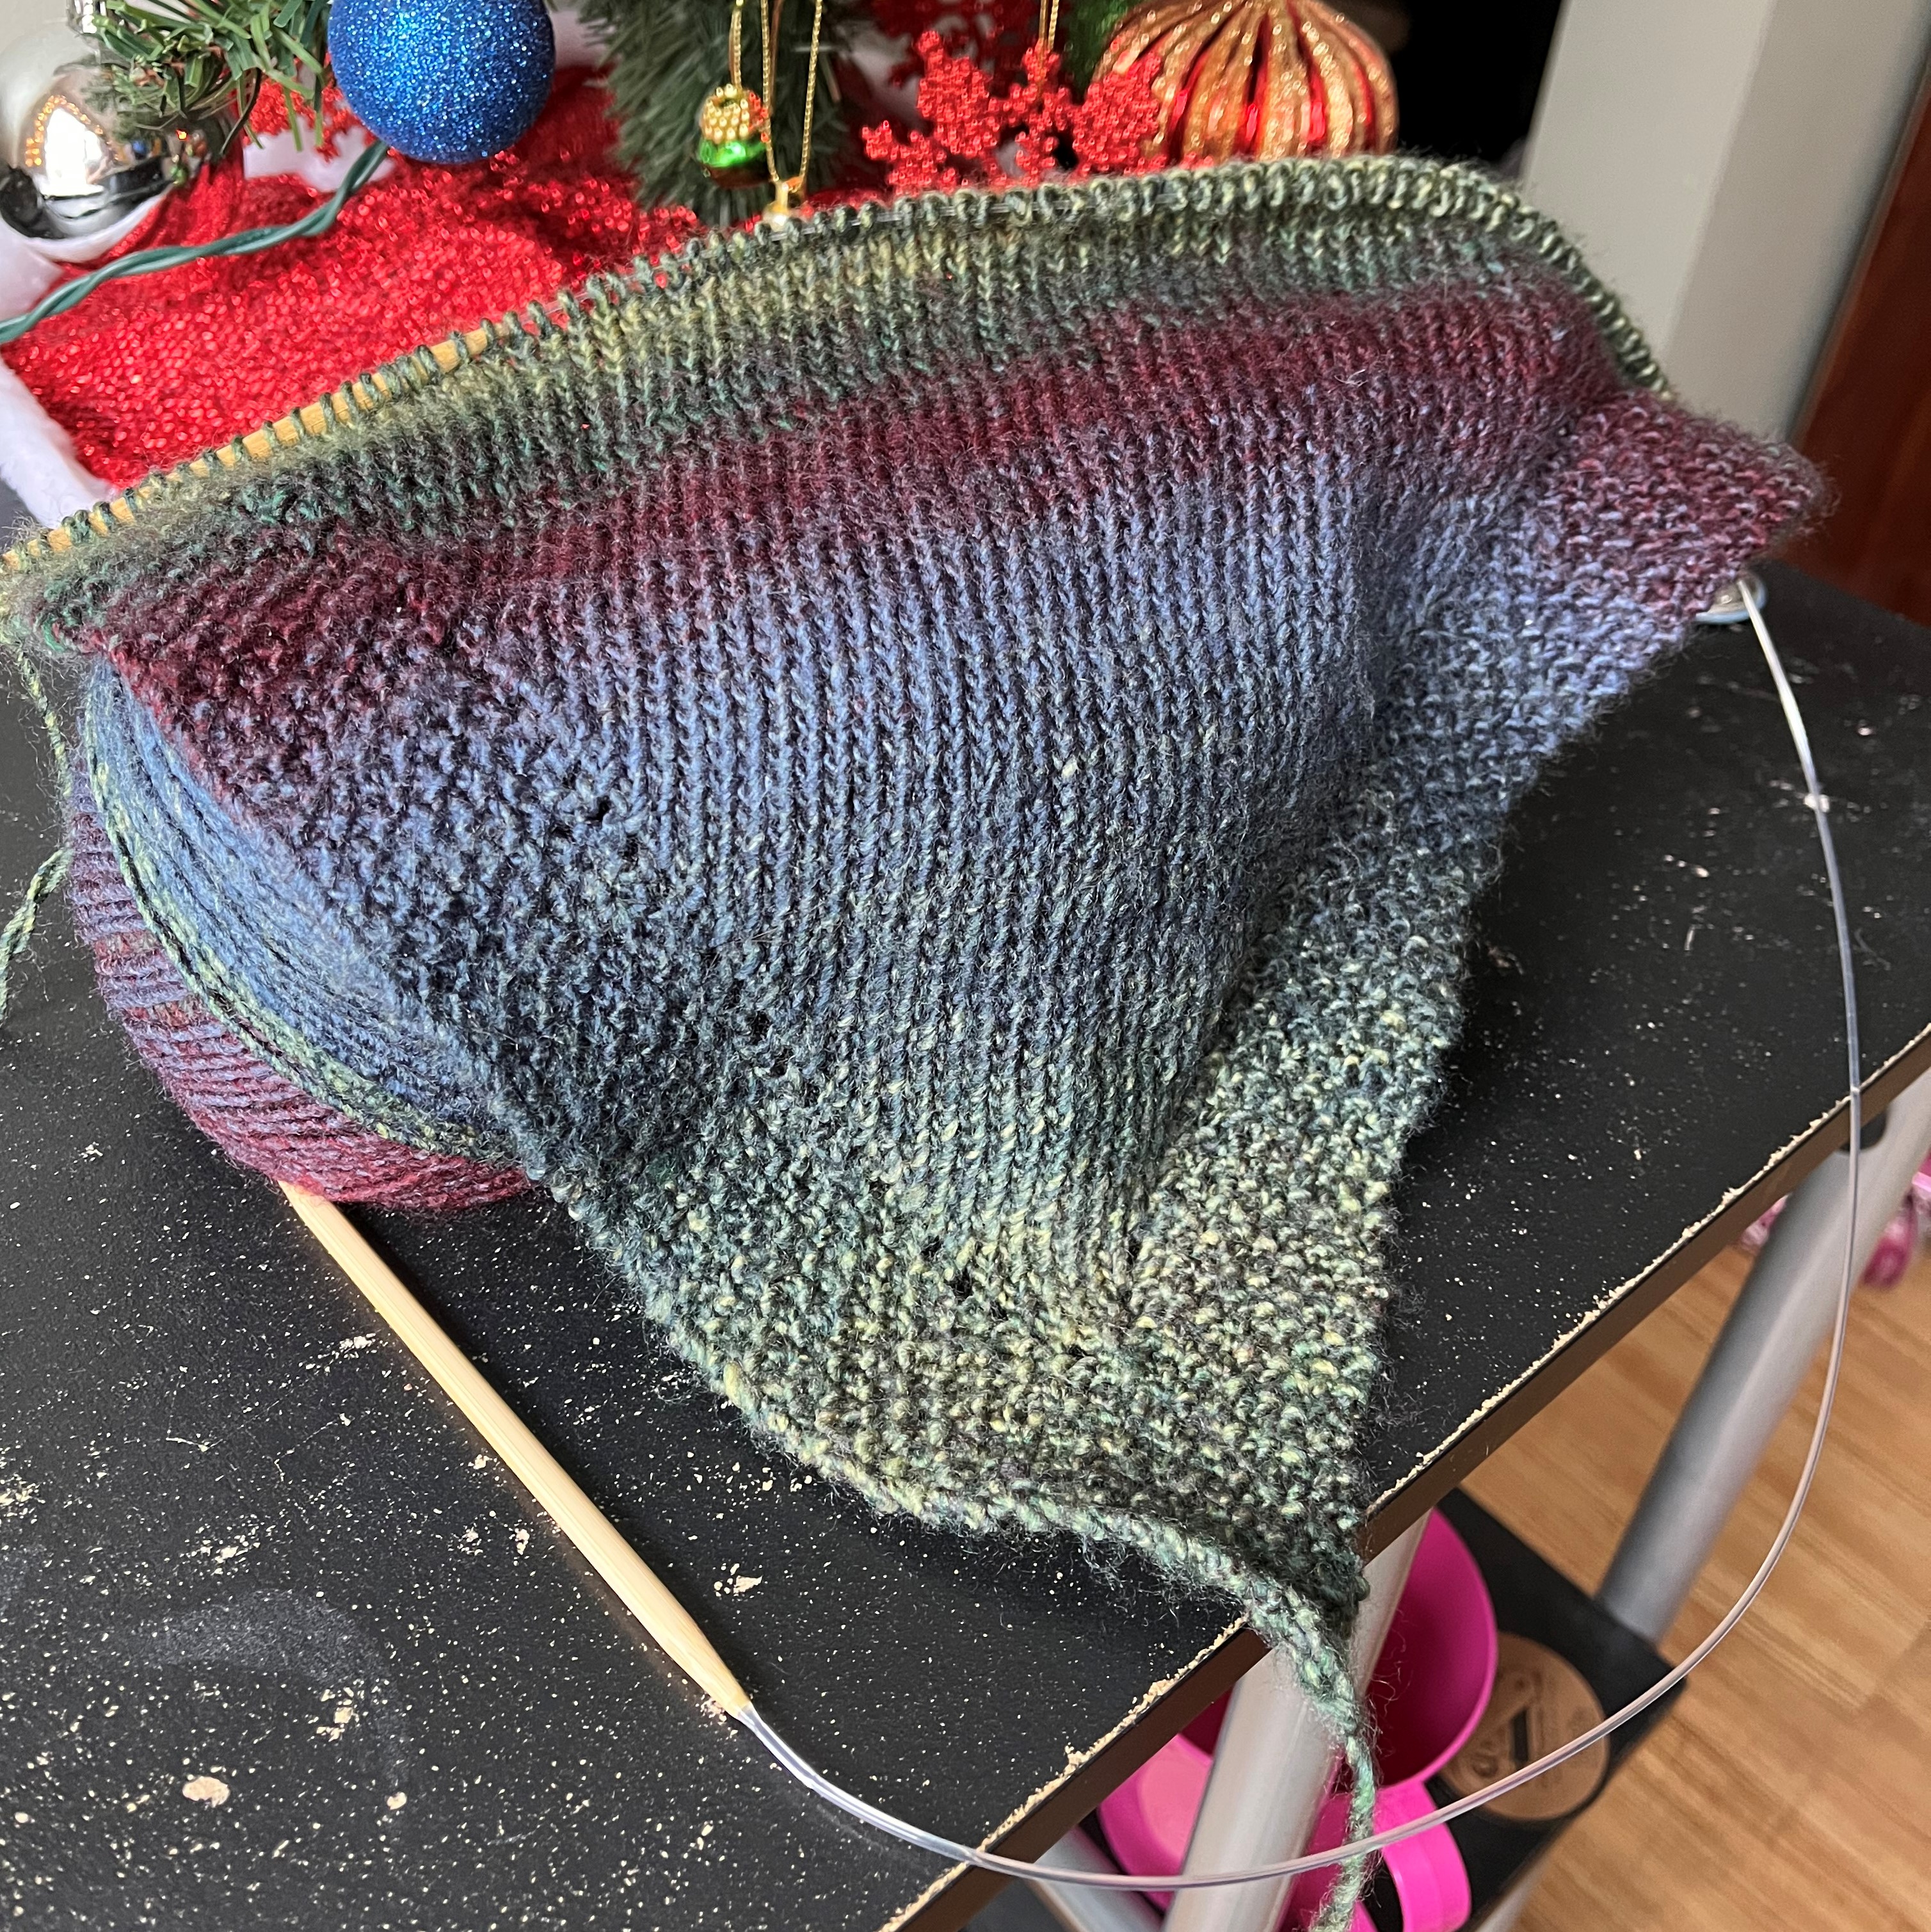 in-progress photo of a multicolored knitted shawl